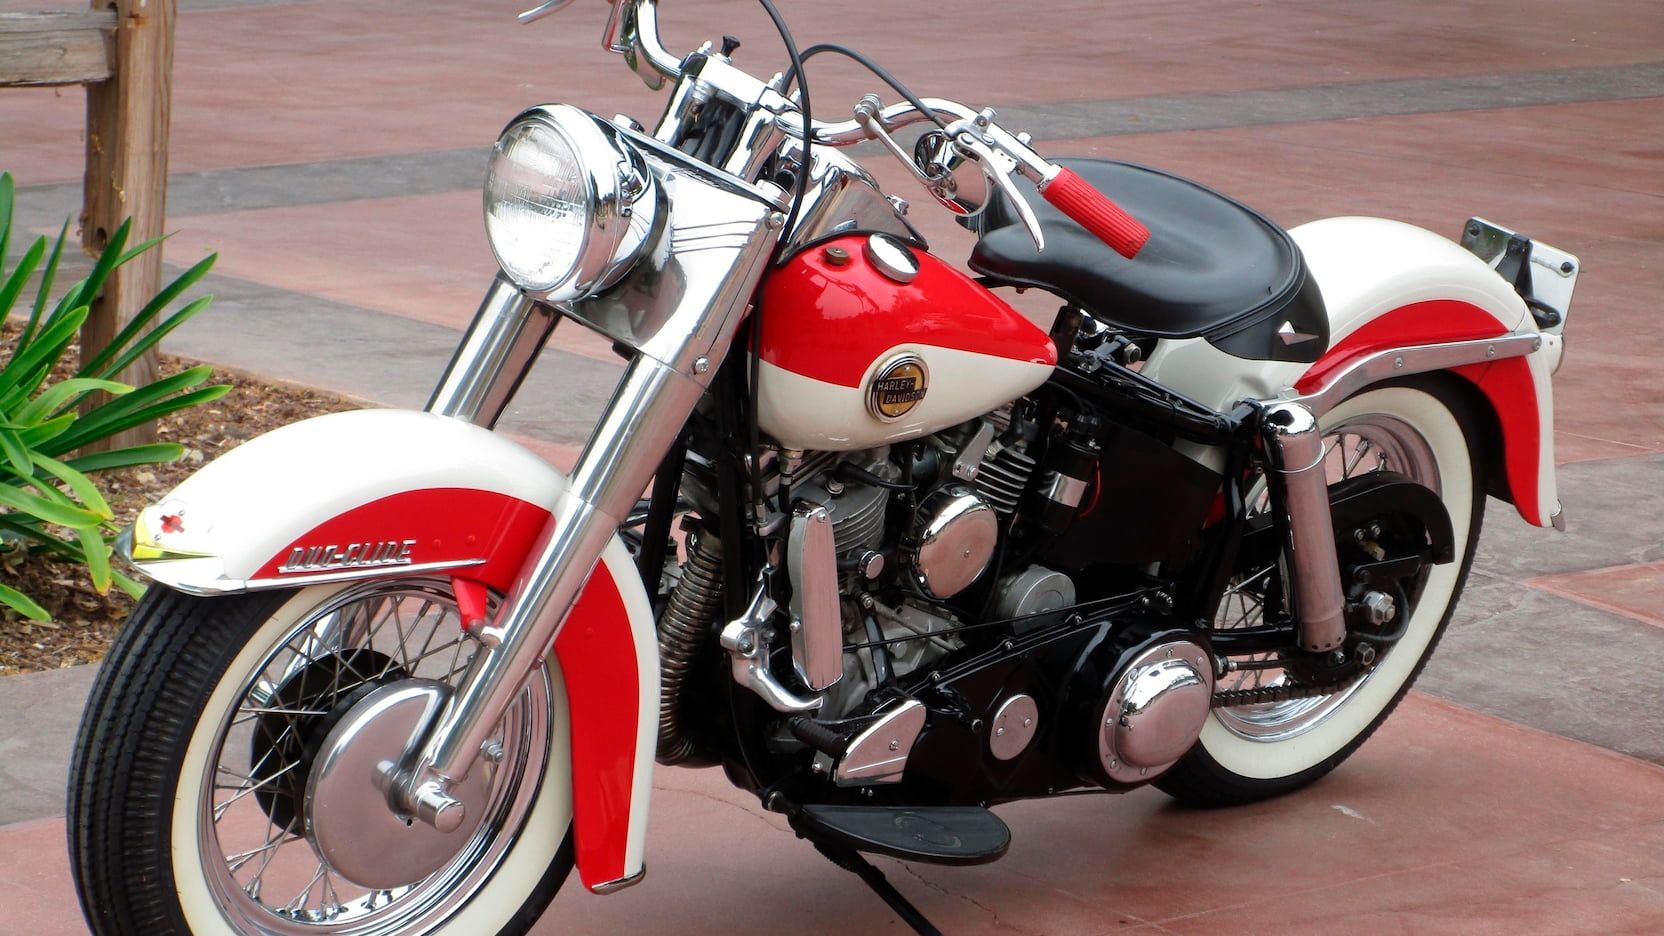 1958 Harley Davidson Duo-Glide parked outside